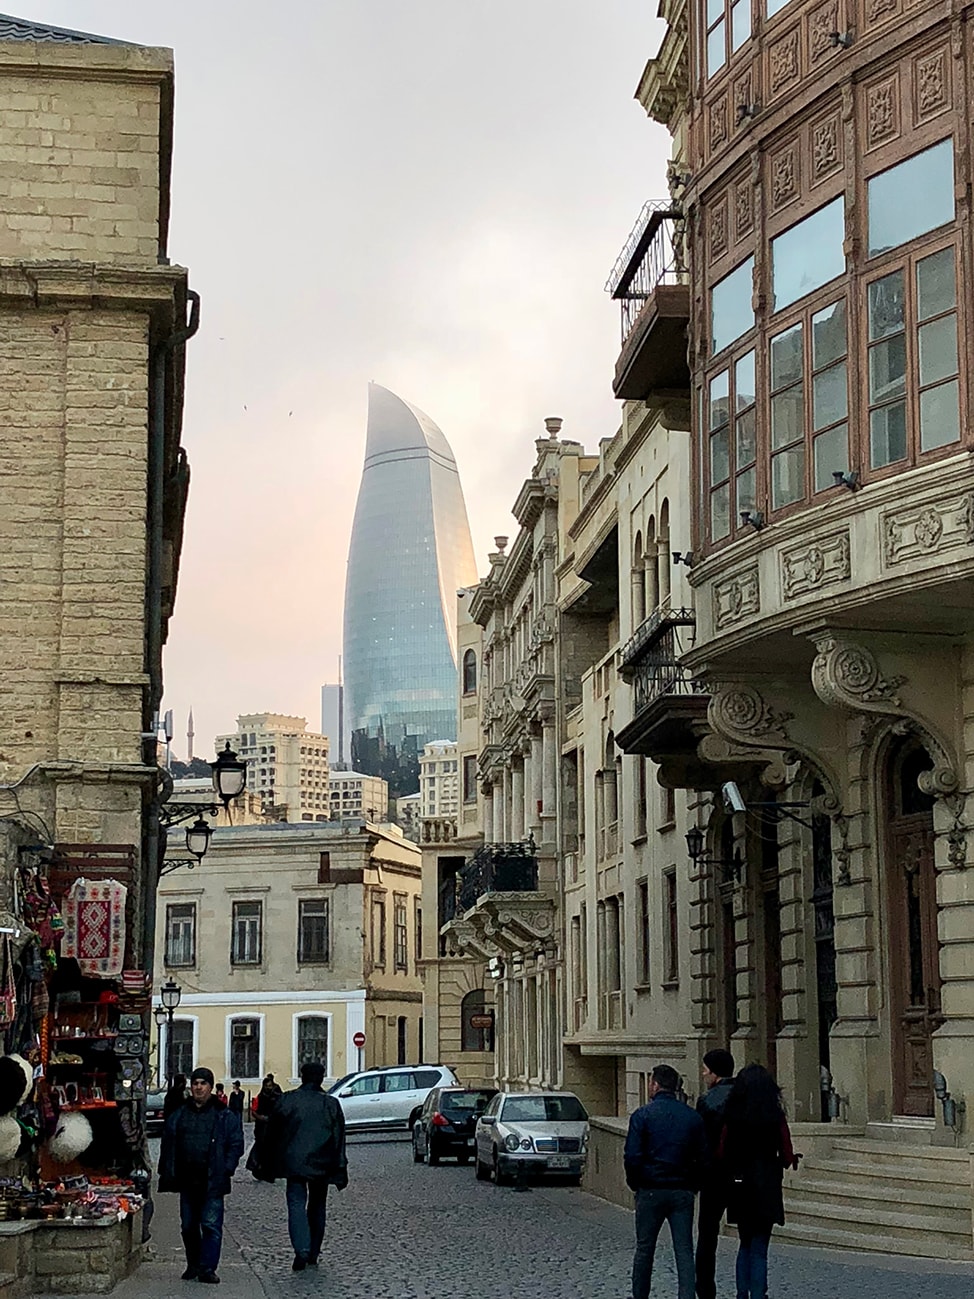 View of Baku's flame towers from the old town 